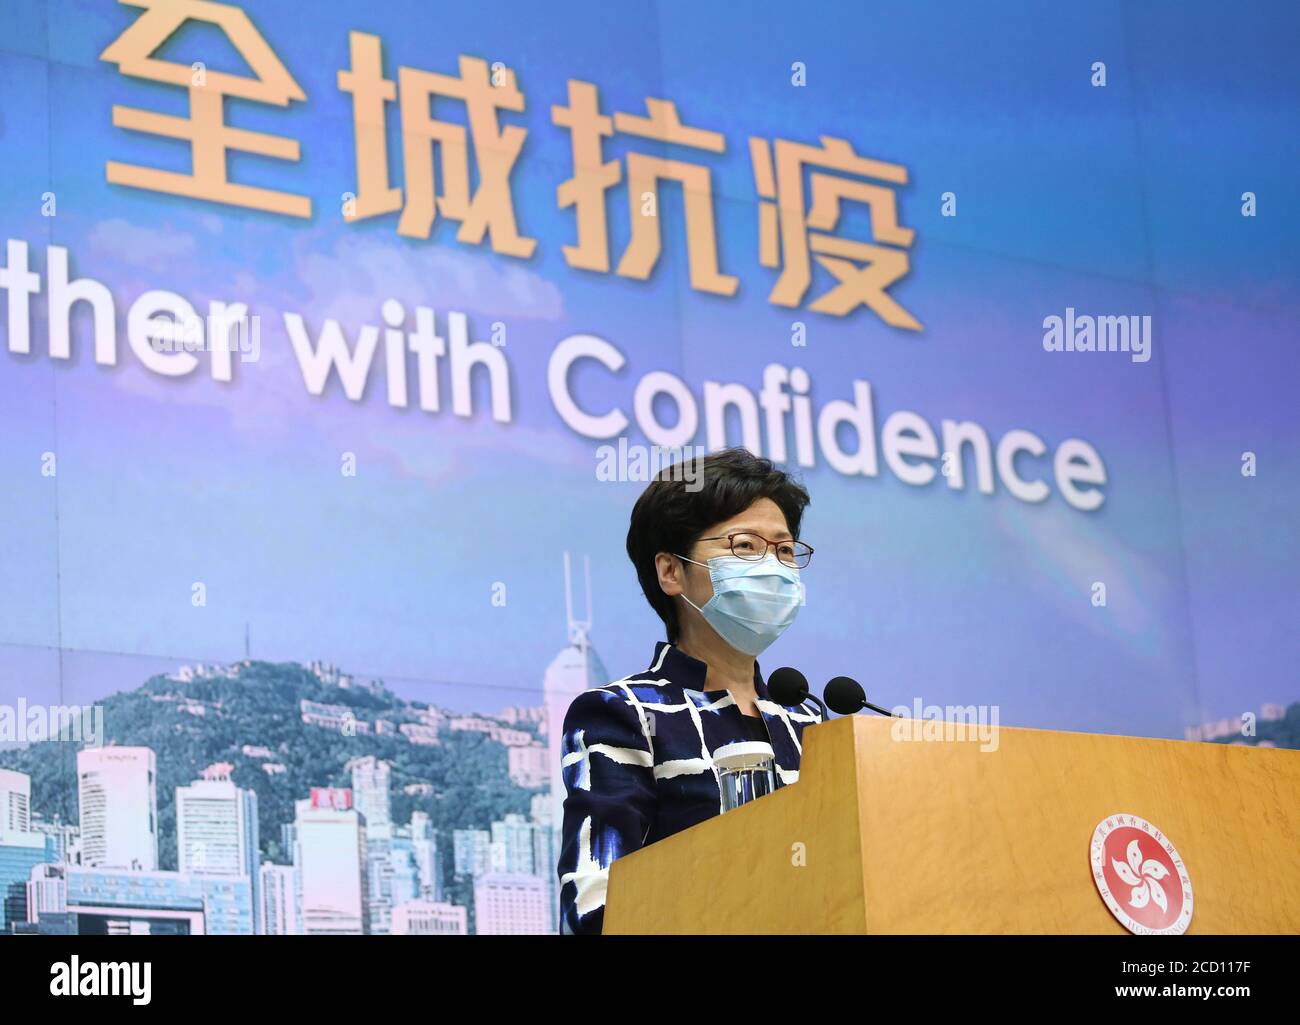 Hong Kong, China. 25th Aug, 2020. Chief Executive of the Hong Kong Special Administrative Region (HKSAR) Carrie Lam attends a press conference in Hong Kong, south China, Aug. 25, 2020. TO GO WITH 'Those who discredit central gov't, HKSAR gov't should be ashamed of themselves: Carrie Lam' Credit: Lui Siu Wai/Xinhua/Alamy Live News Stock Photo